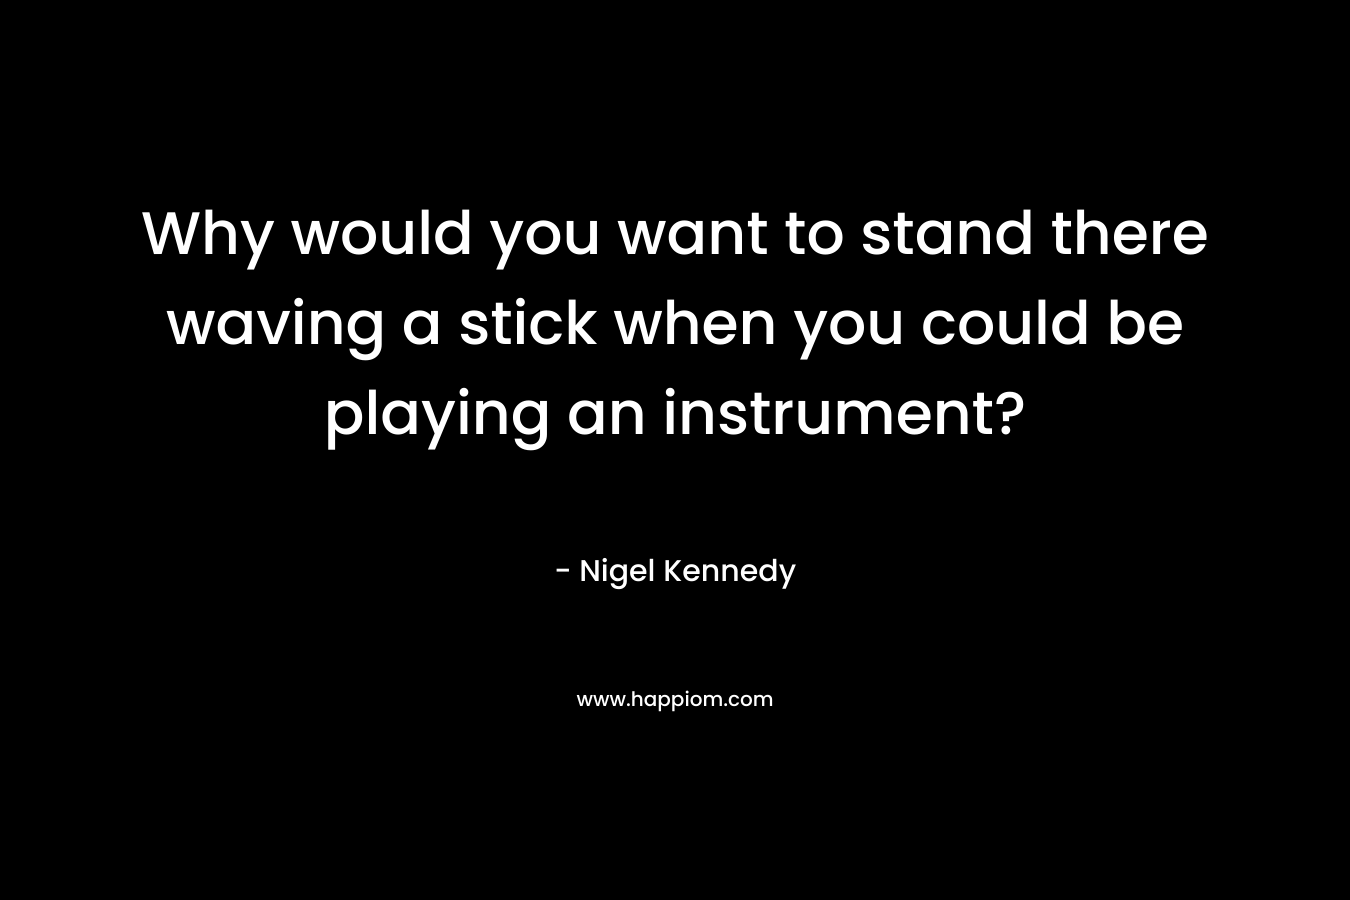 Why would you want to stand there waving a stick when you could be playing an instrument?